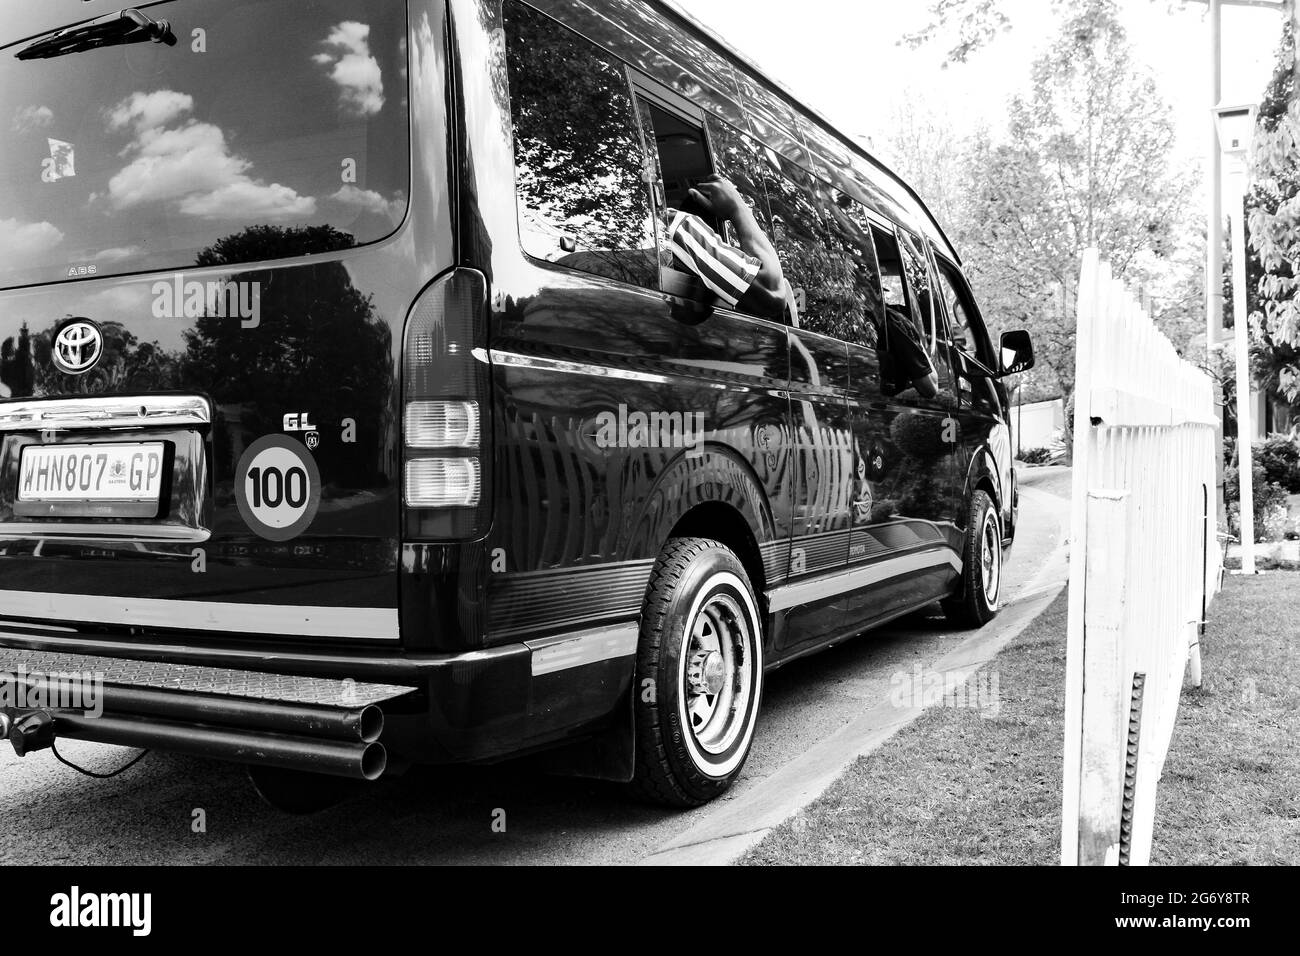 JOHANNESBURG, SOUTH AFRICA - Jan 06, 2021: Johannesburg, South Africa - September 10, 2010- Minibus taxi van parked outside a house in a wealthy neigh Stock Photo